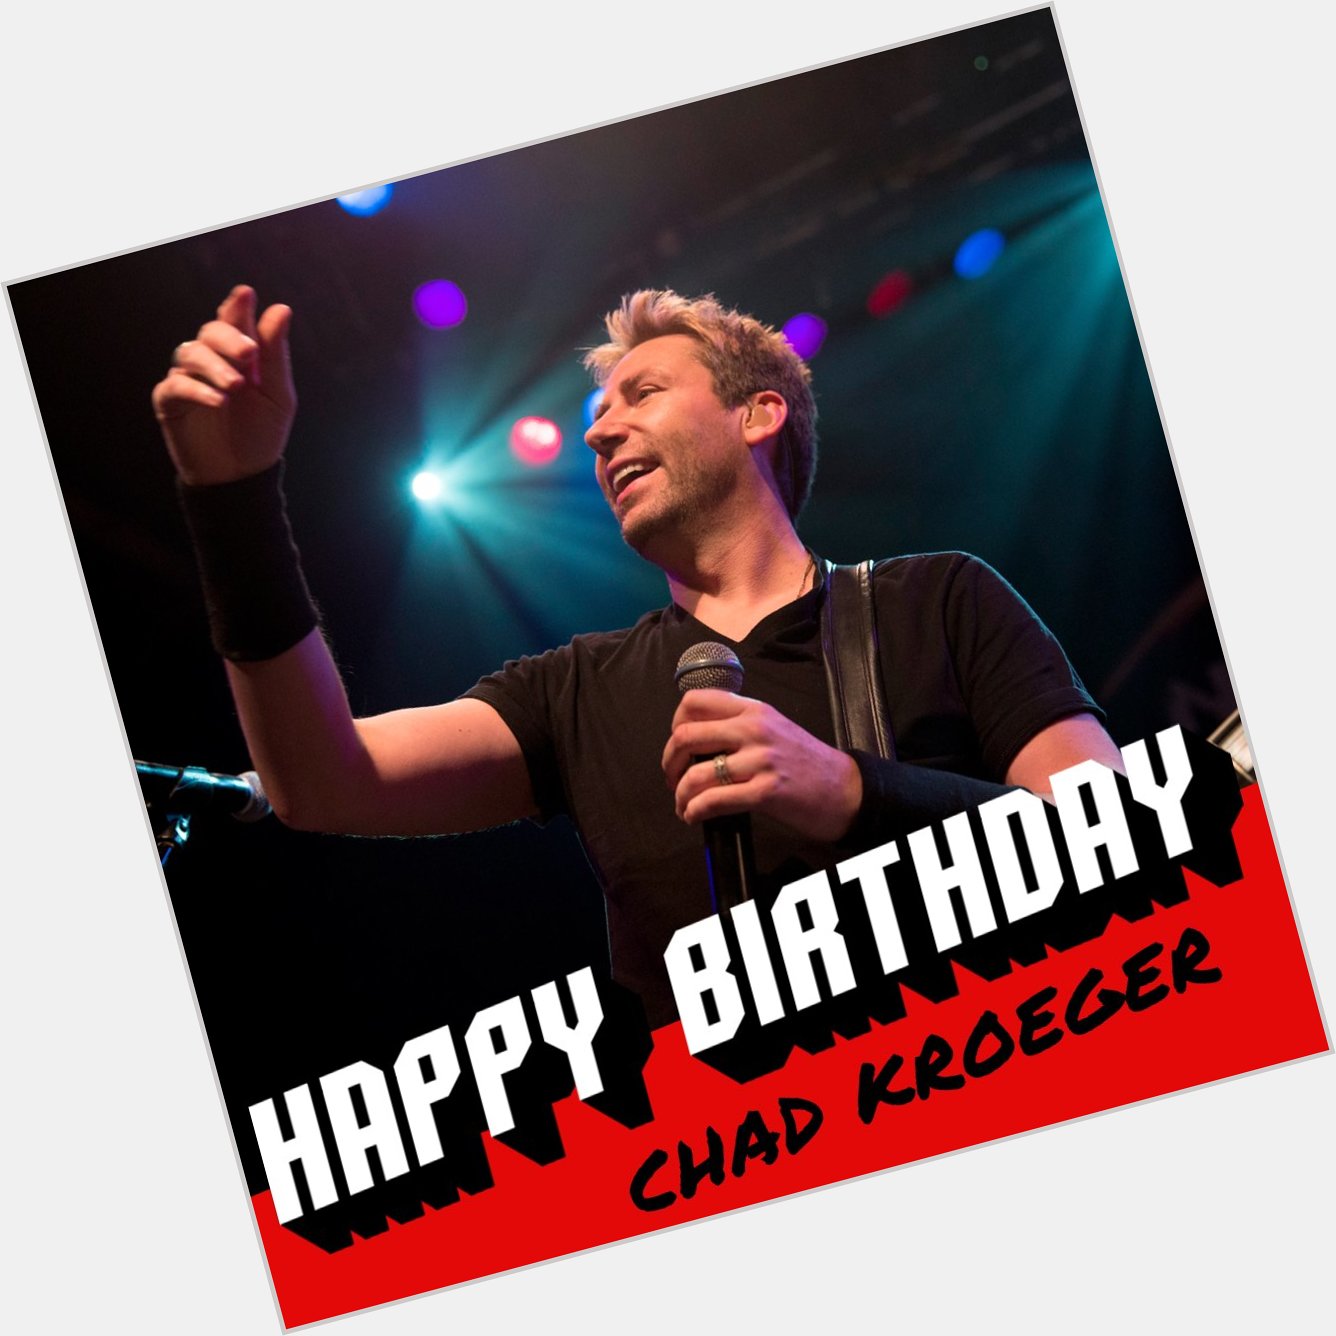 Happy 43rd birthday to Chad Kroeger!  